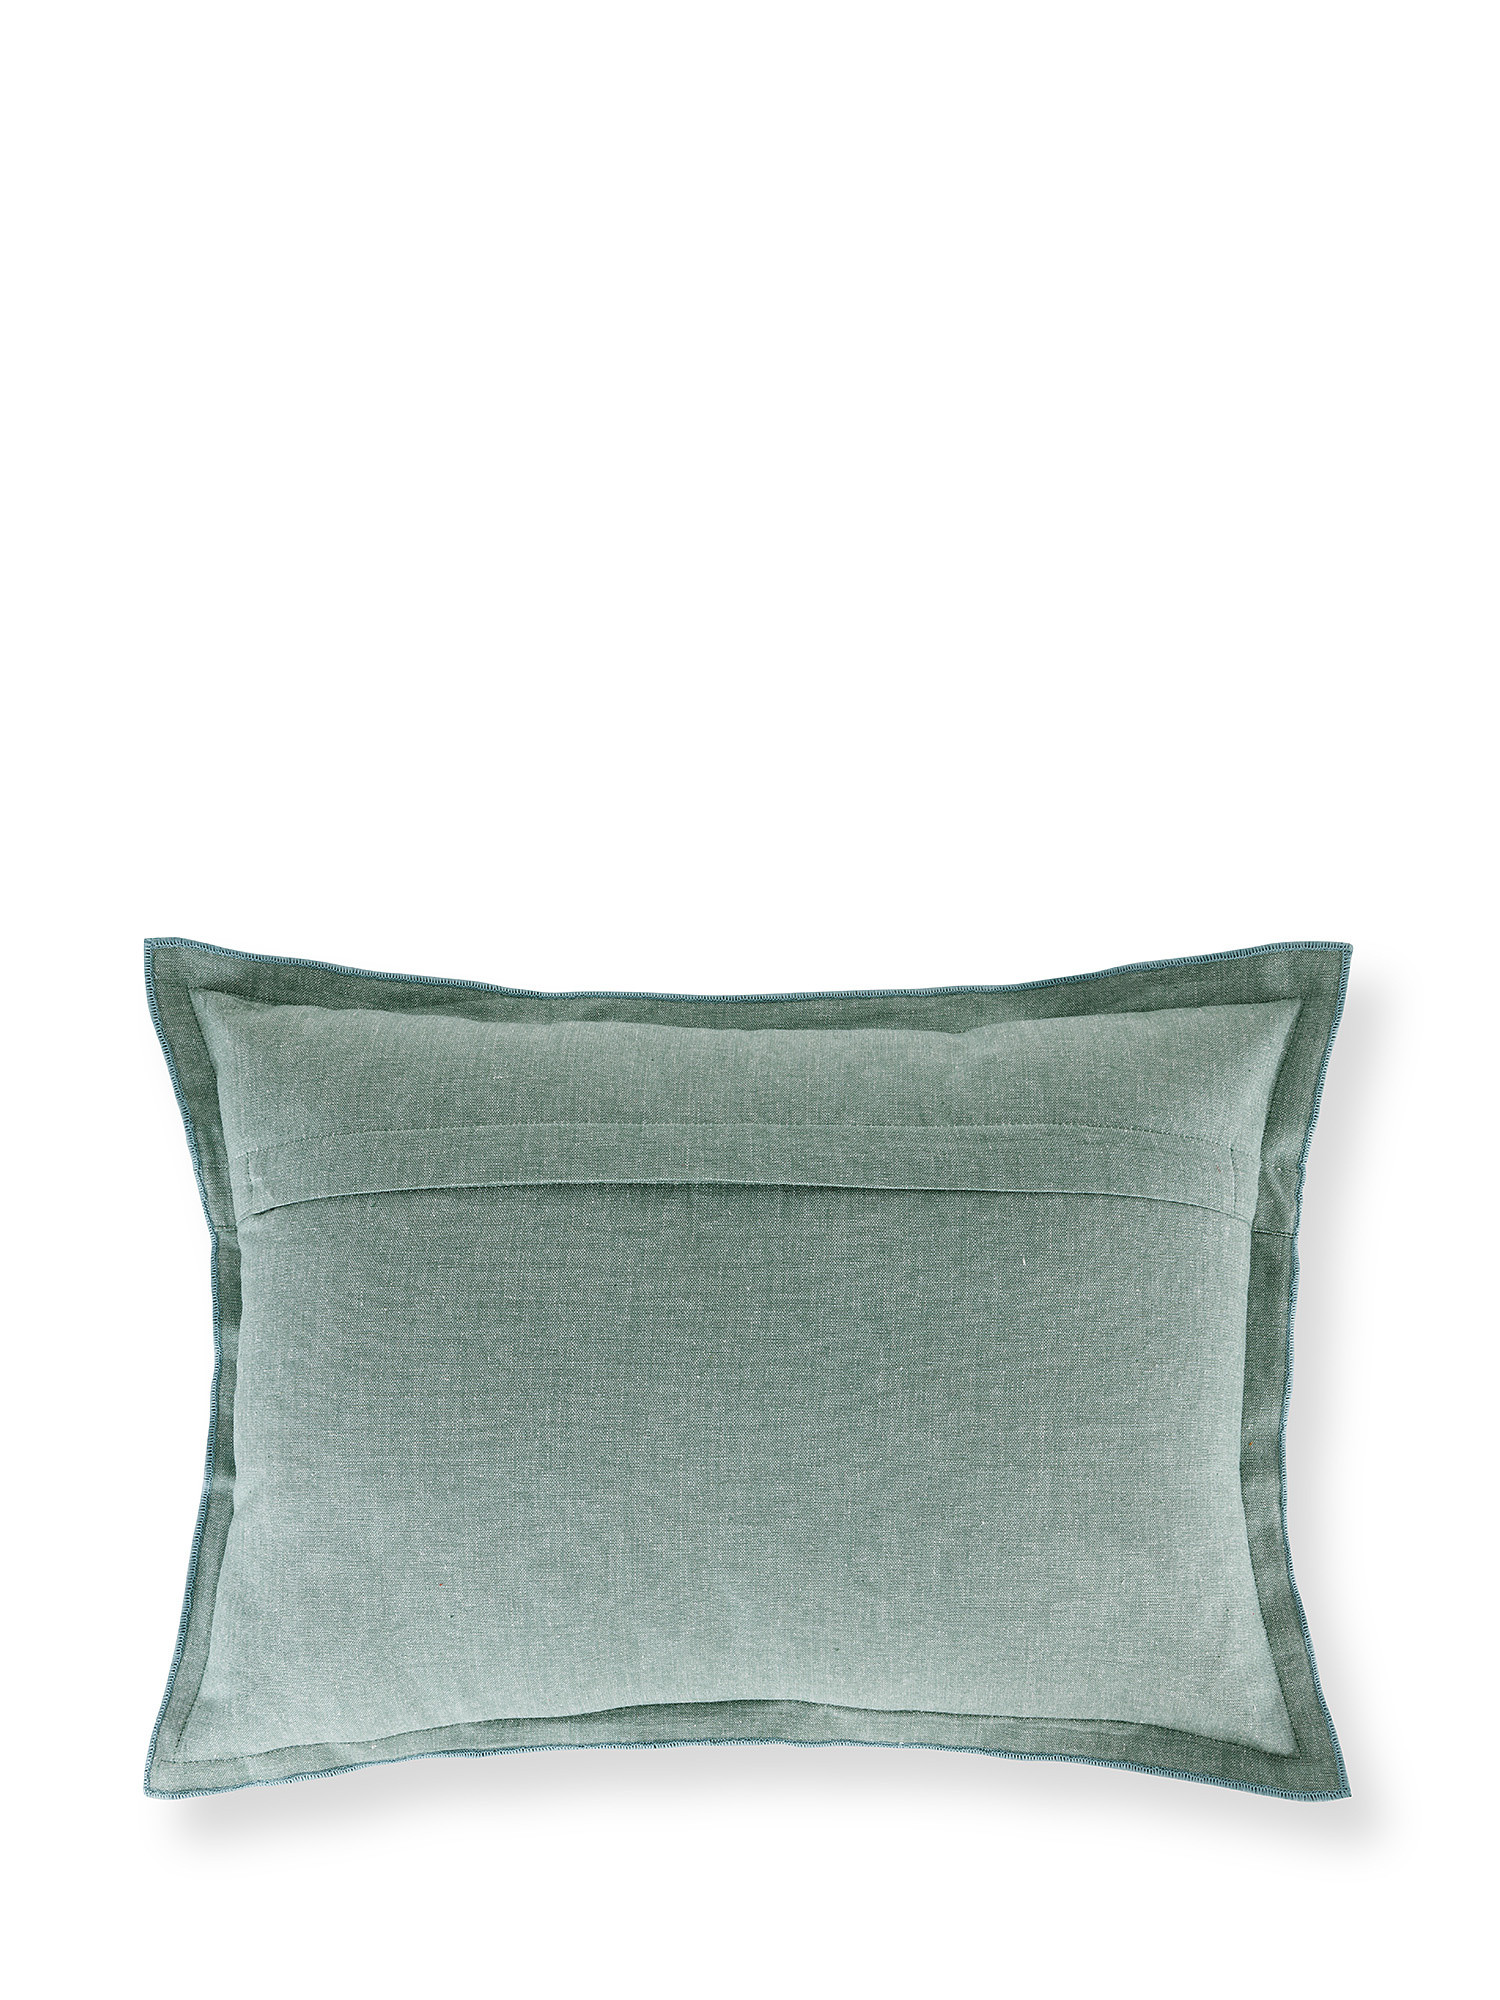 Solid color cotton cushion 45x45cm, Green, large image number 1